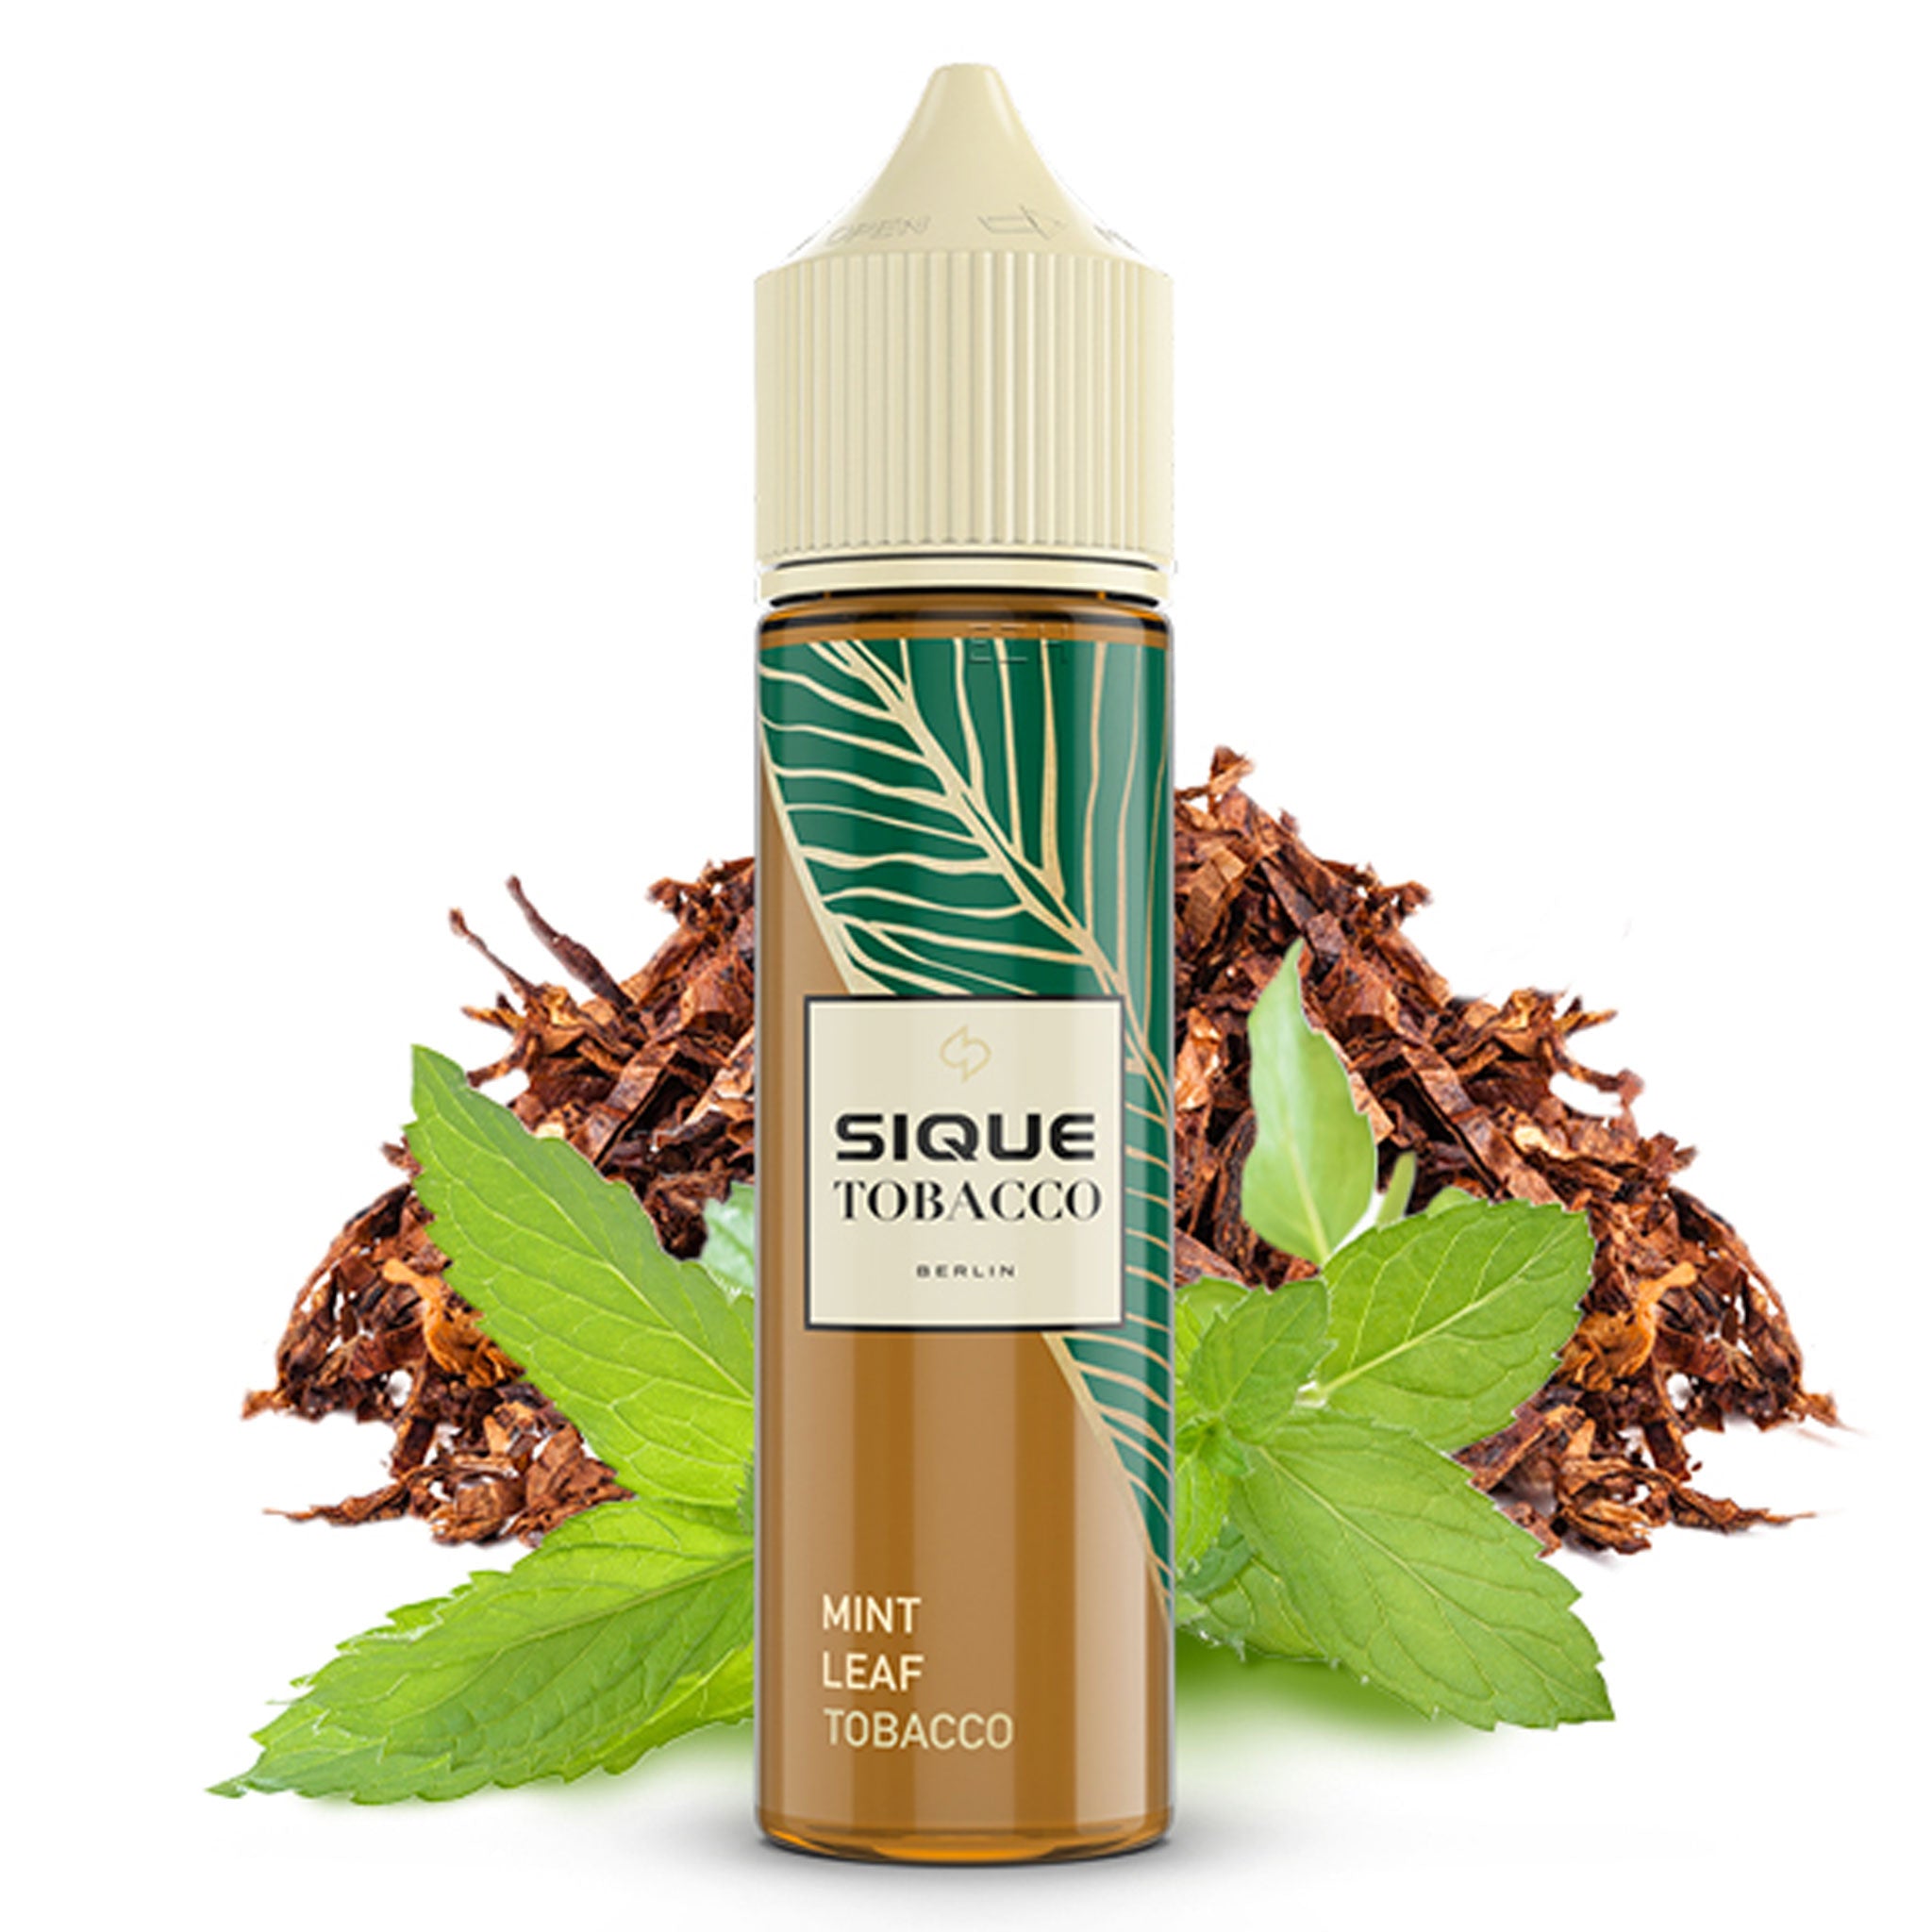 Sique - Mint Leaf Tobacco - Longfill Aroma 7 ml